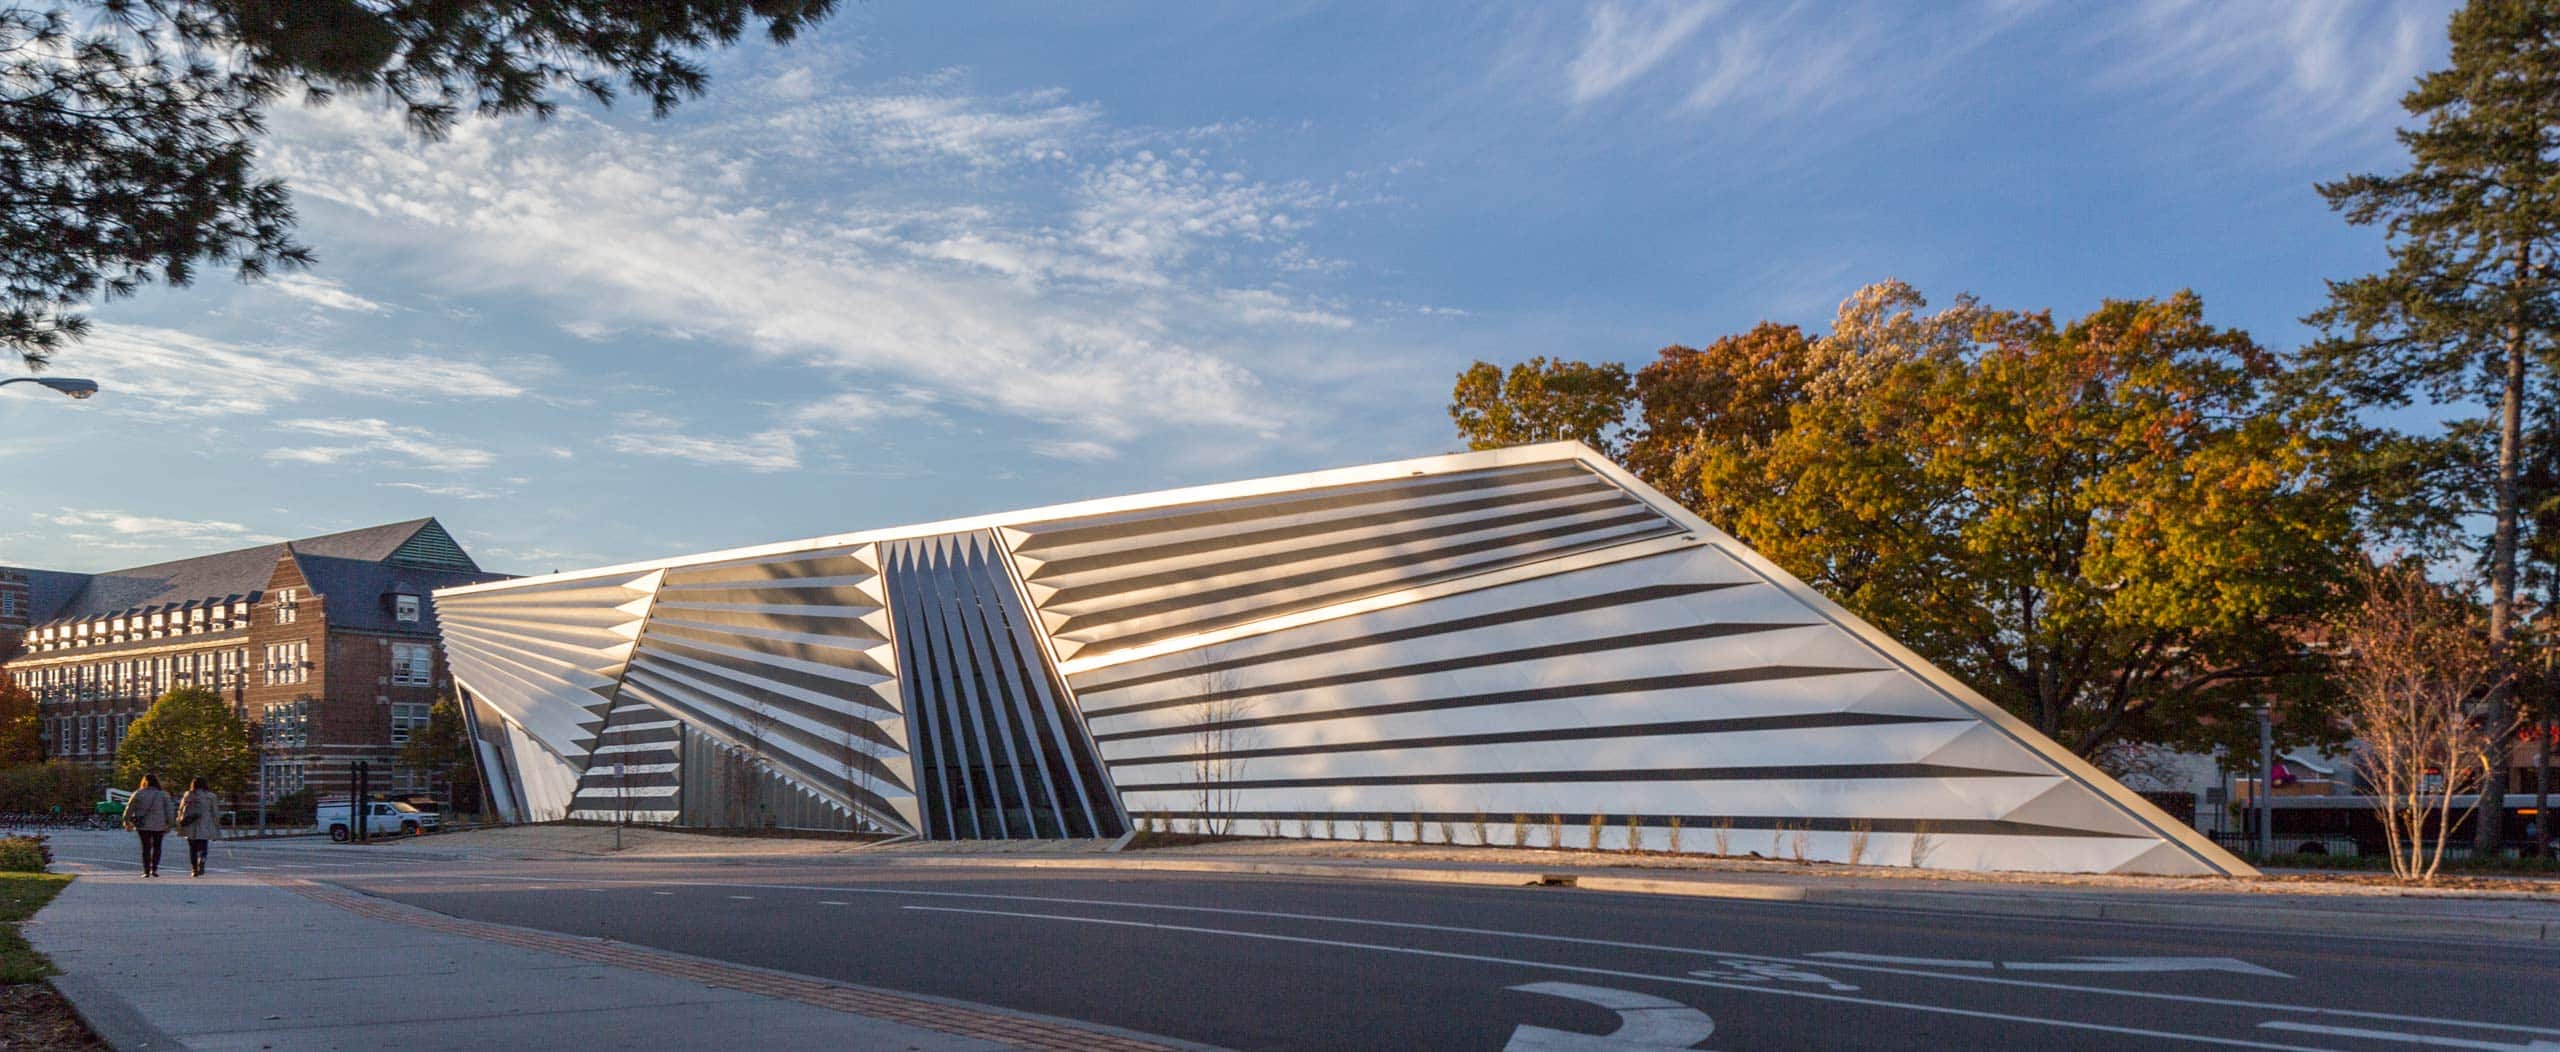 South side view of the Broad Museum in East Lansing, Michigan.